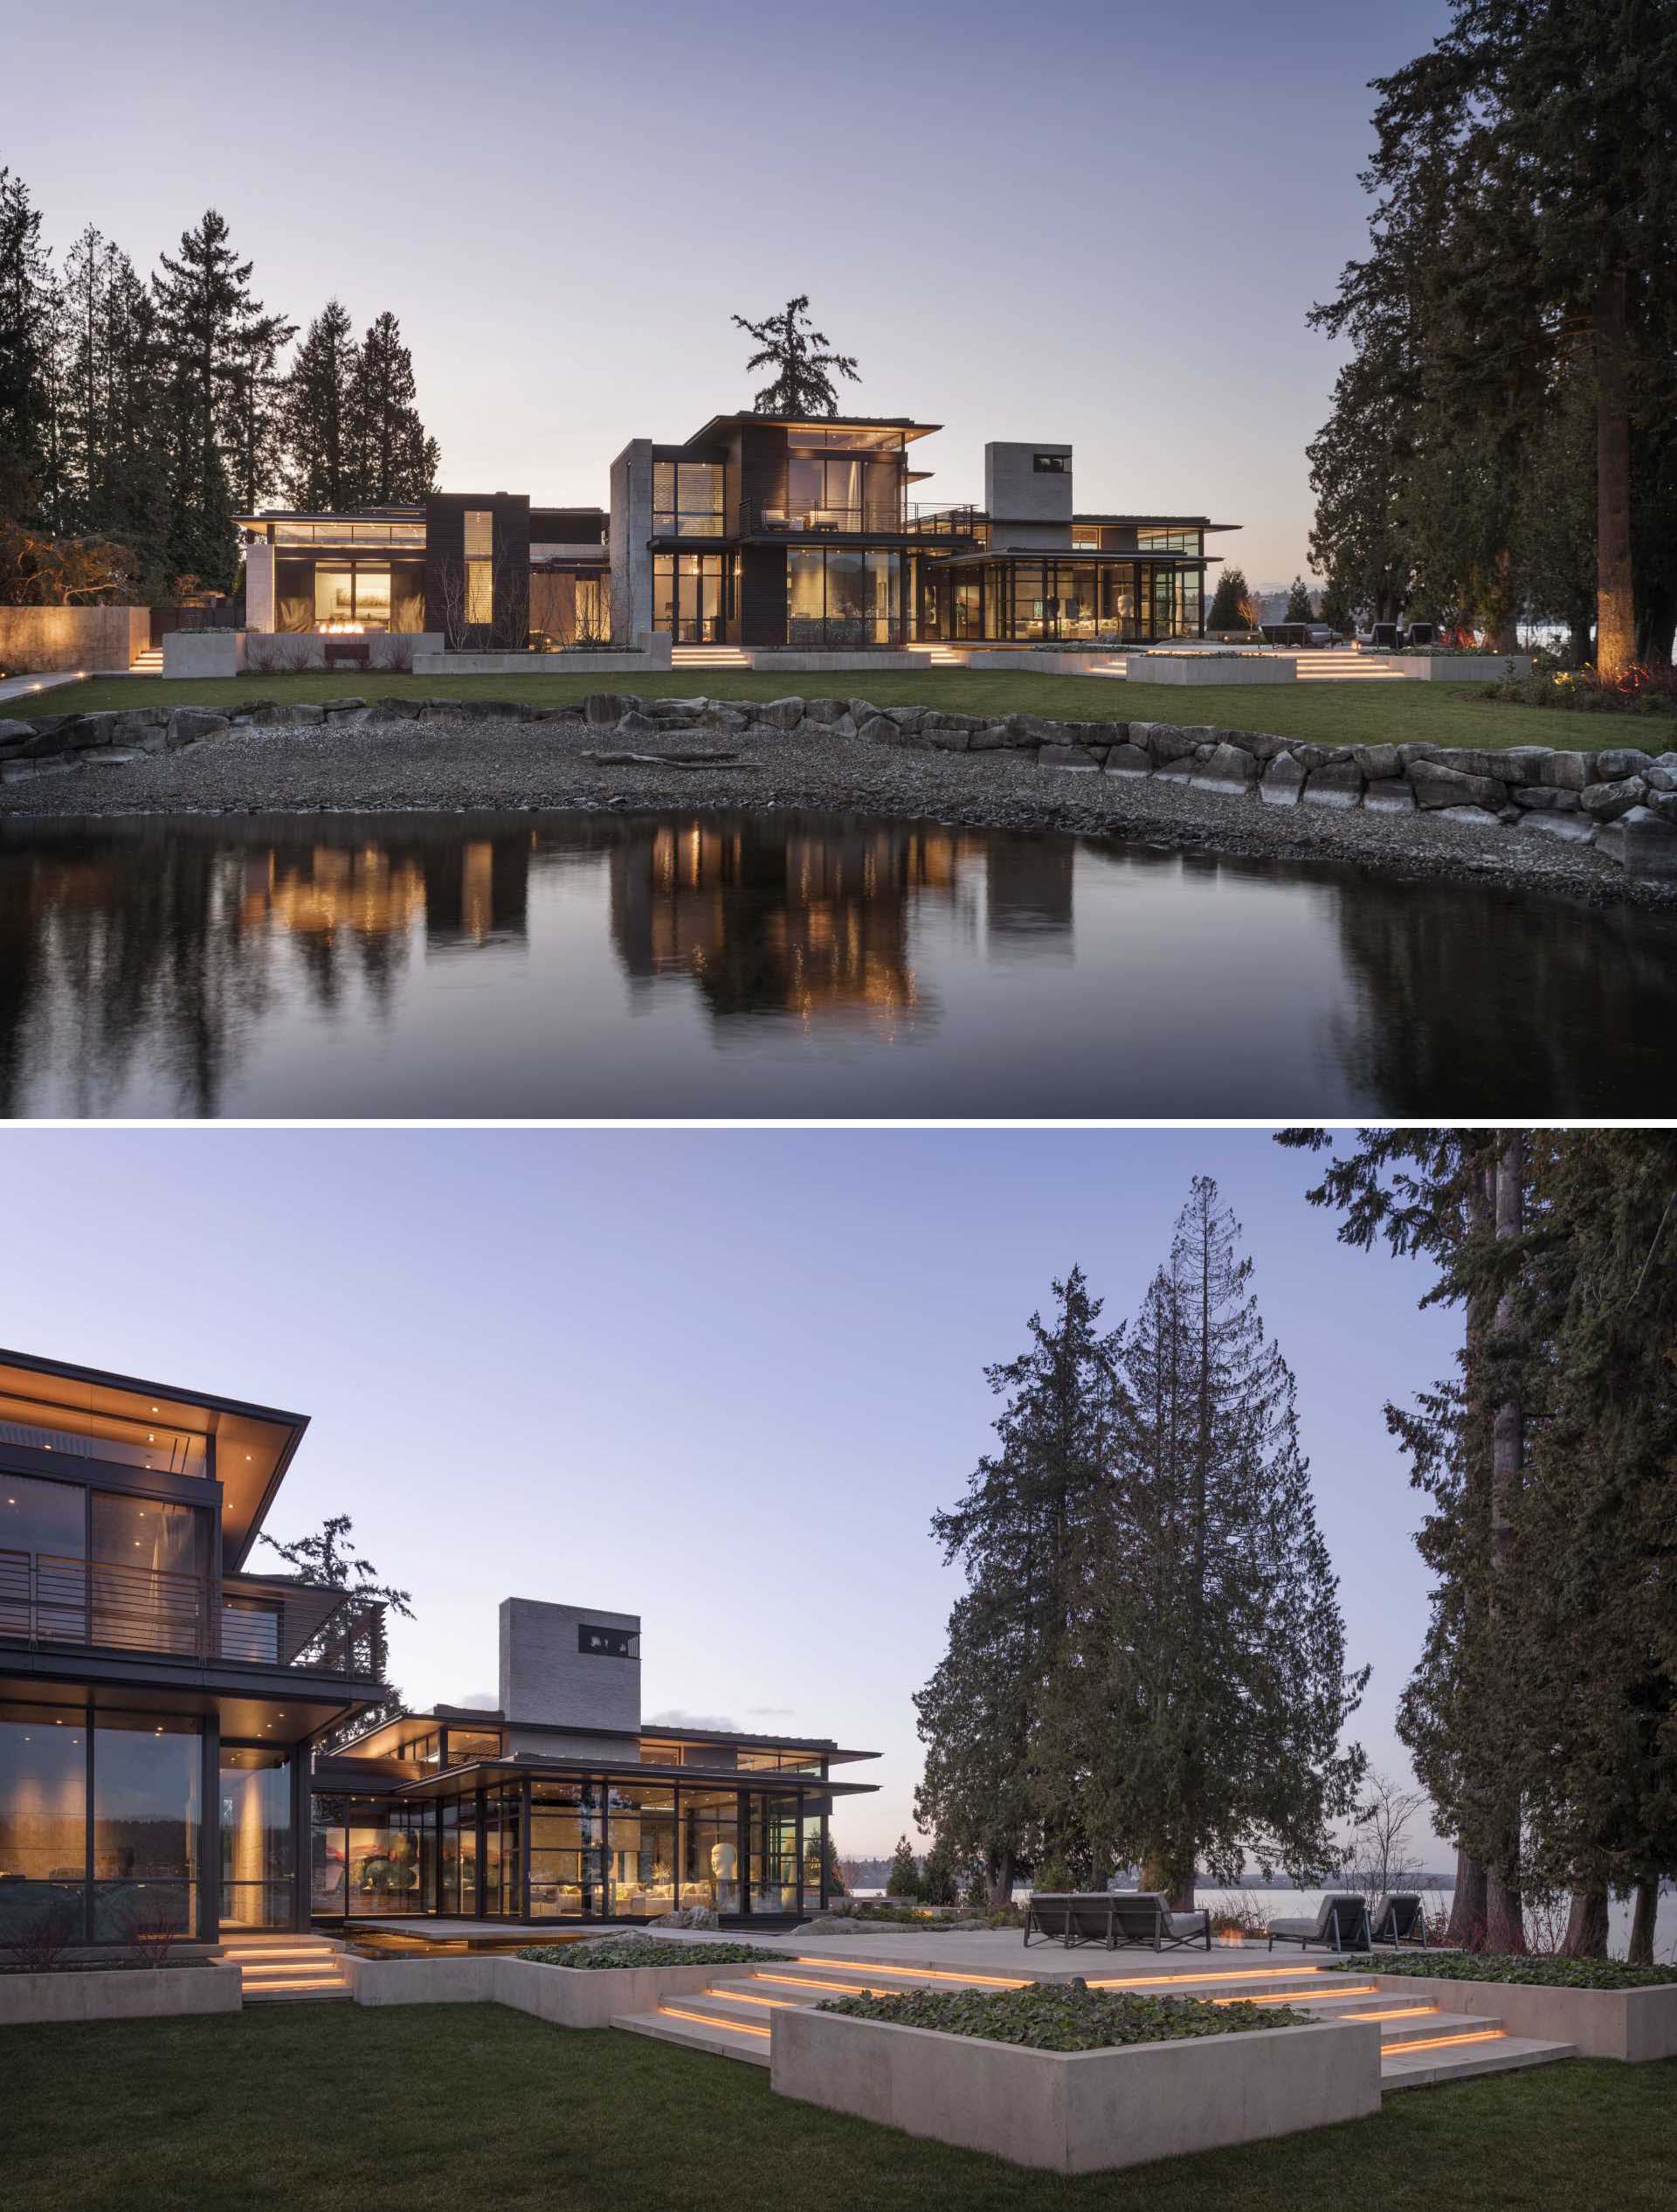 A modern lakeside home that showcases materials like wood, stone, concrete, and steel, as well as a series of water features.